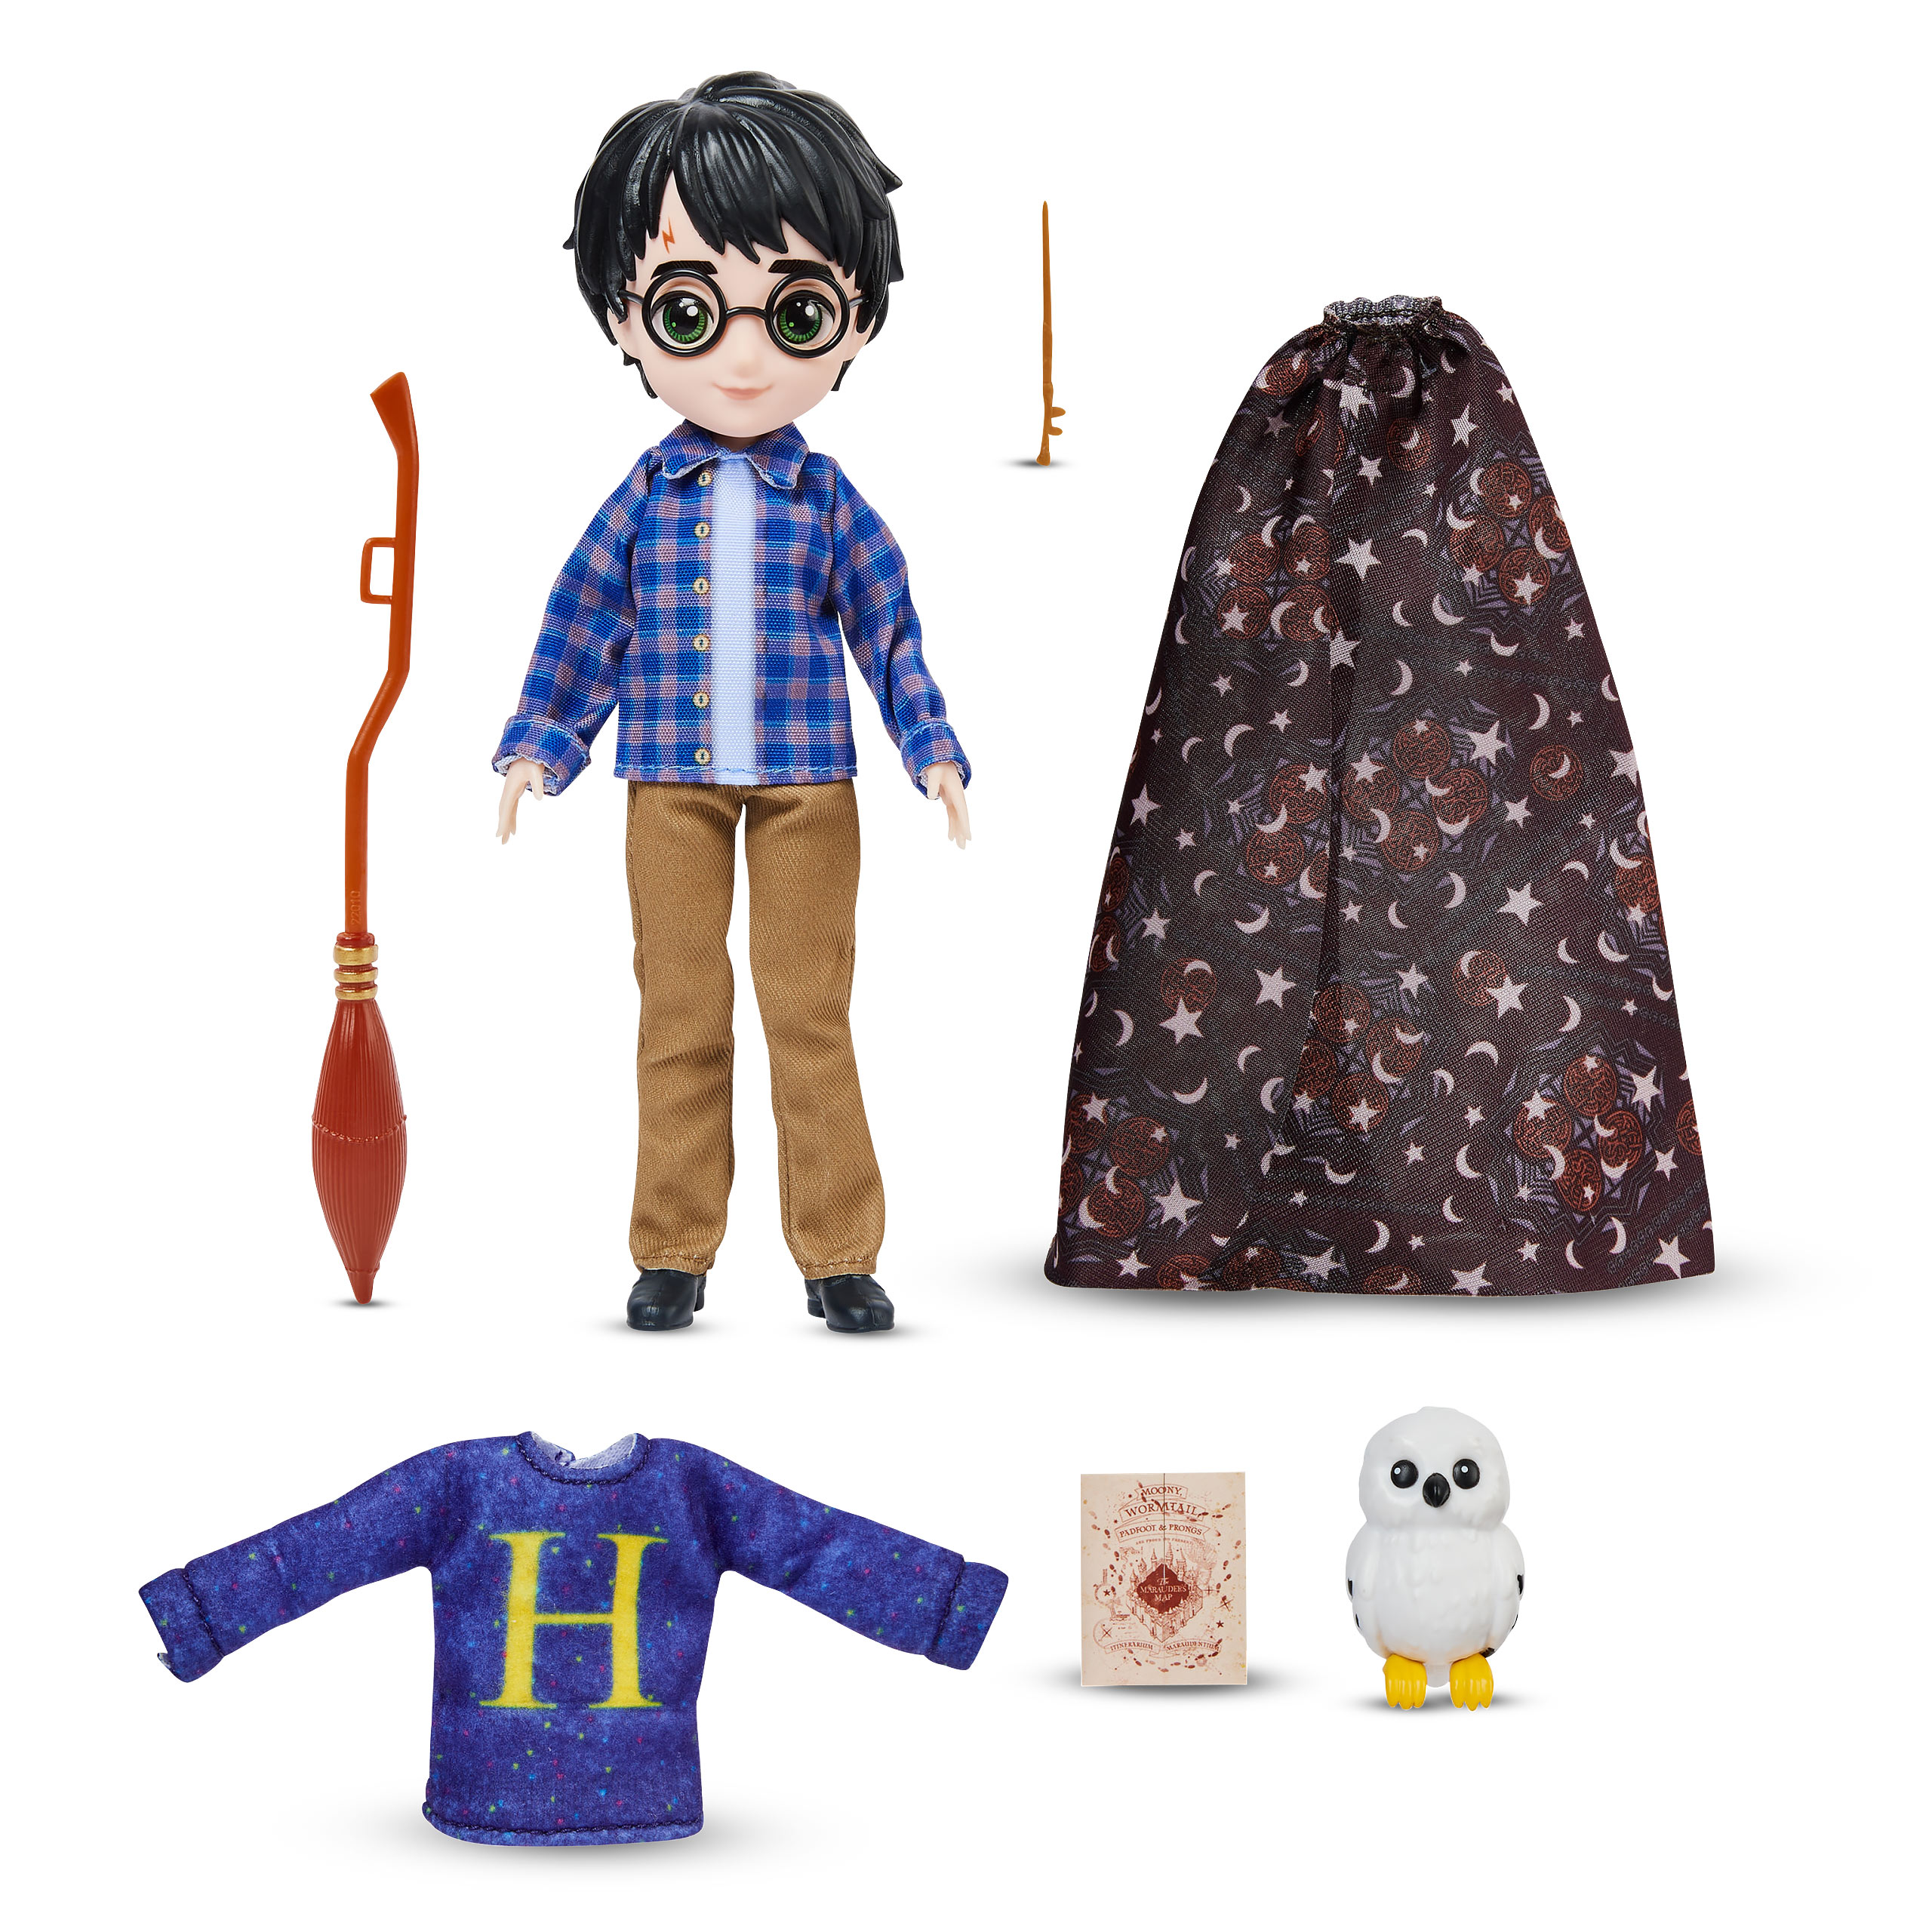 Harry Potter Puppe Deluxe mit Hedwig